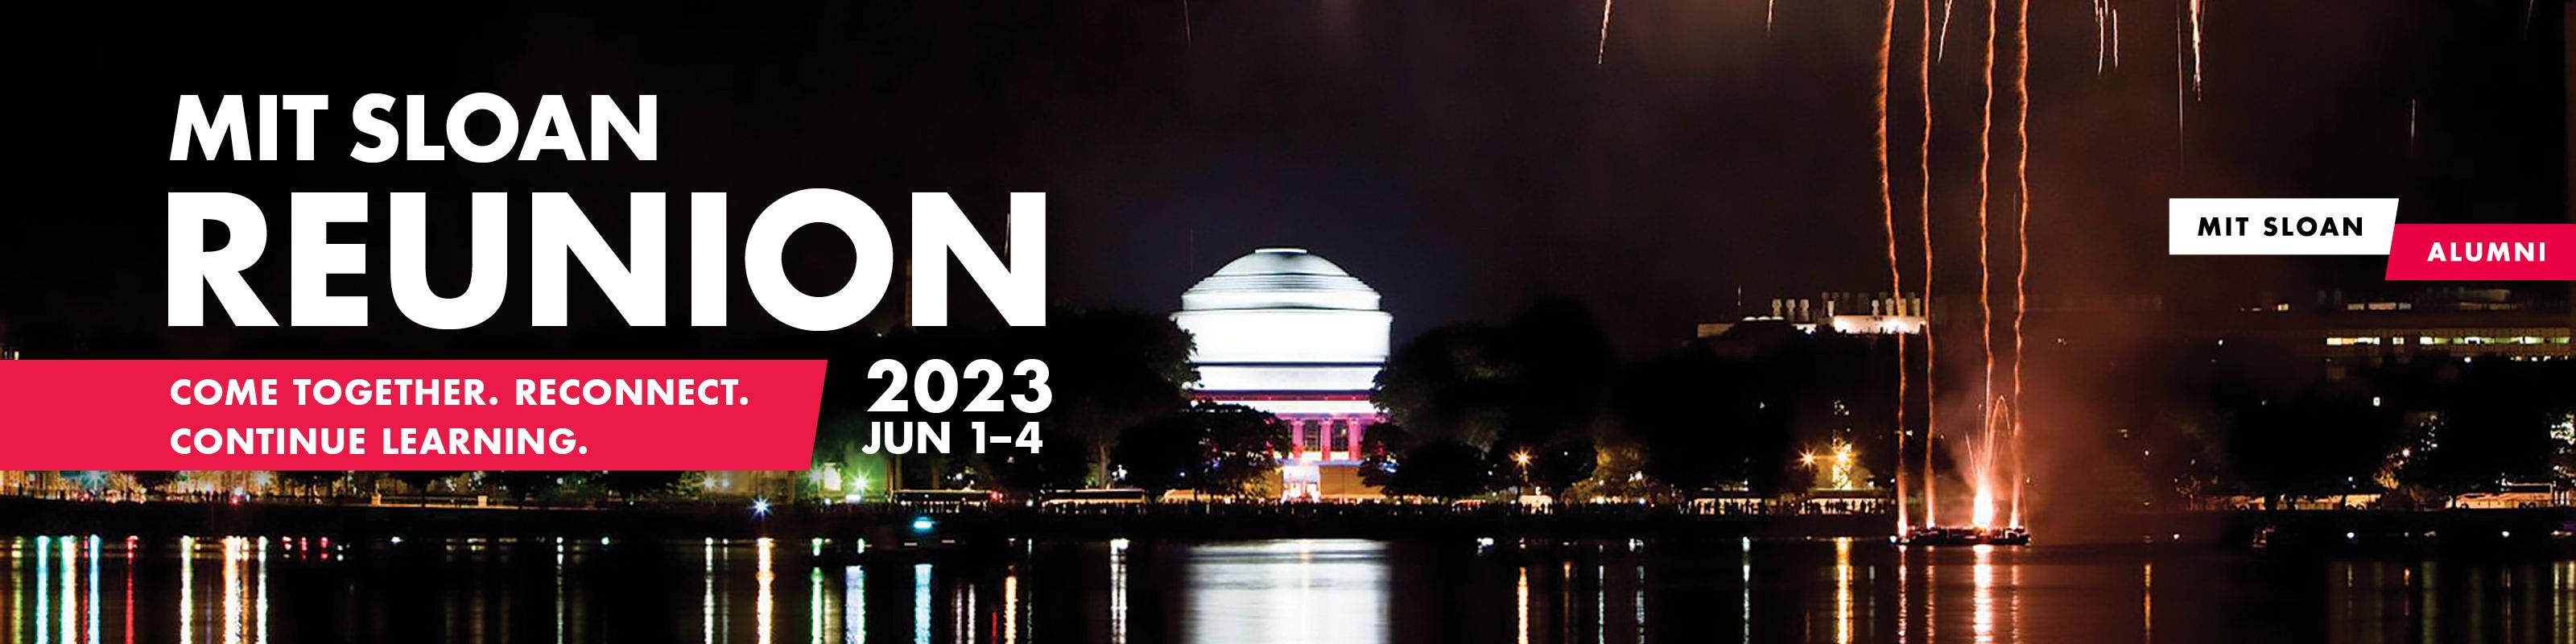 MIT MBA Class of 2023